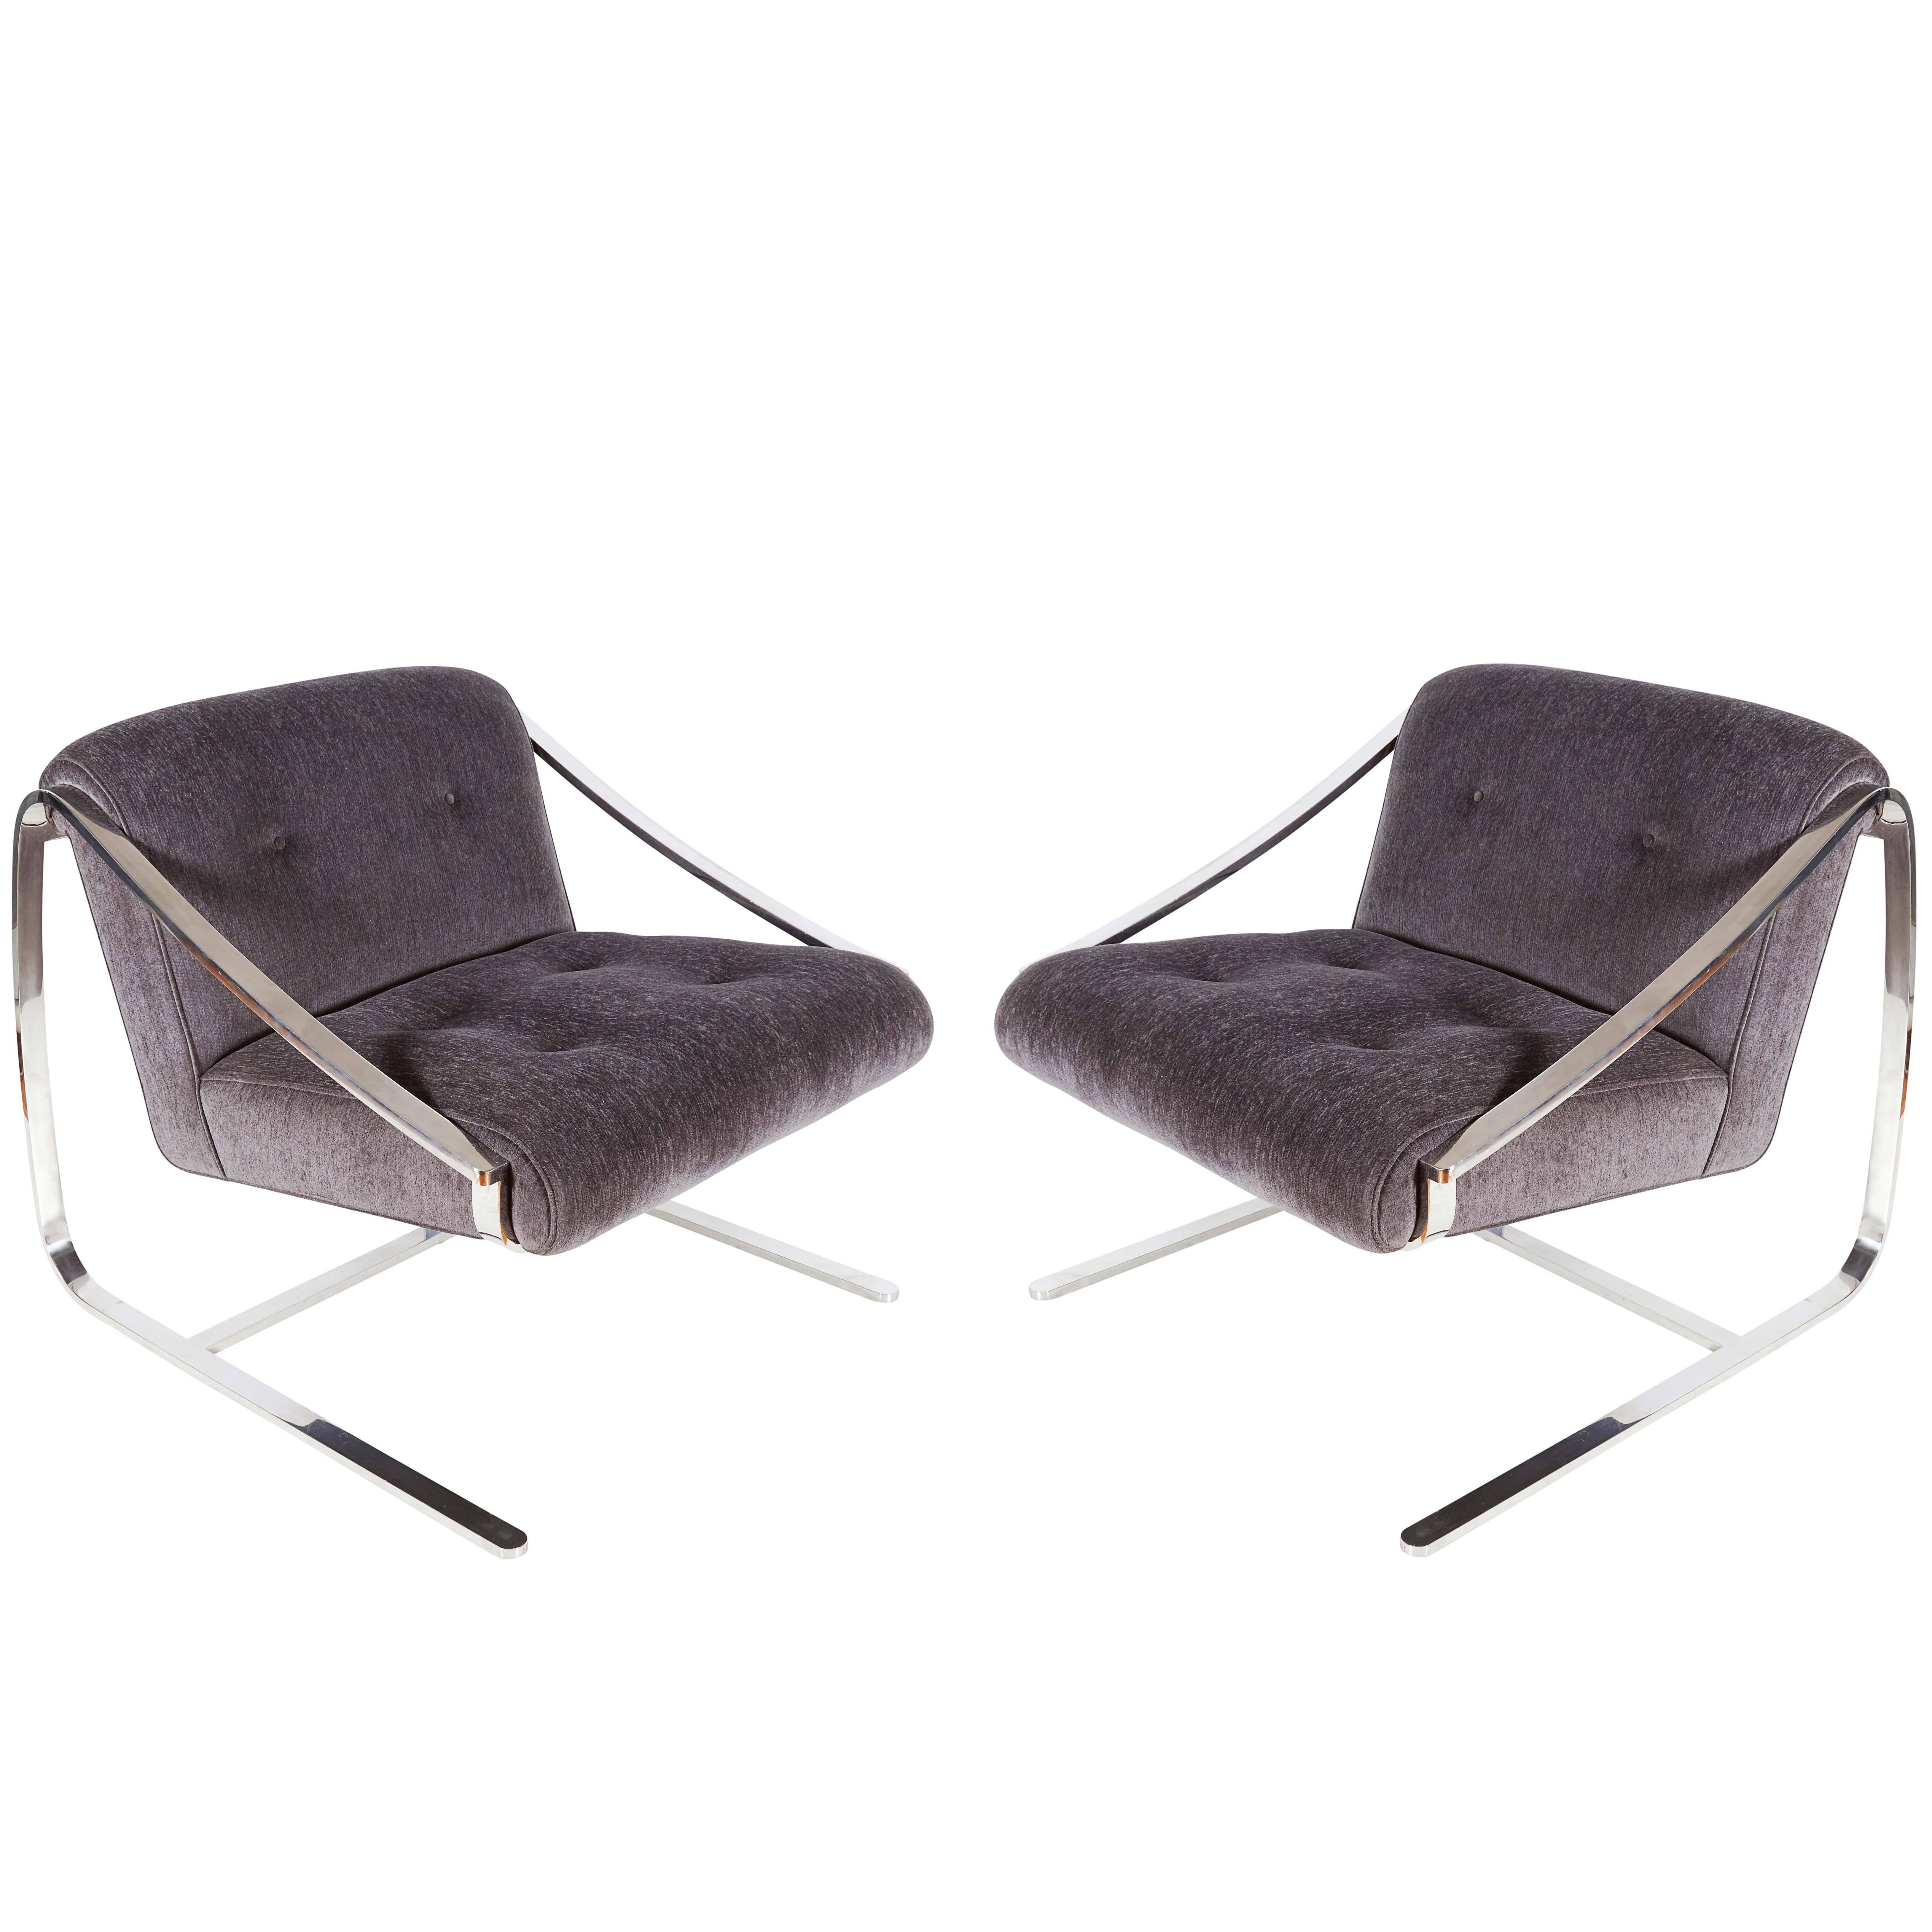 Pair of Brueton 'Plaza' Lounge Chairs by Charles Gibilterra